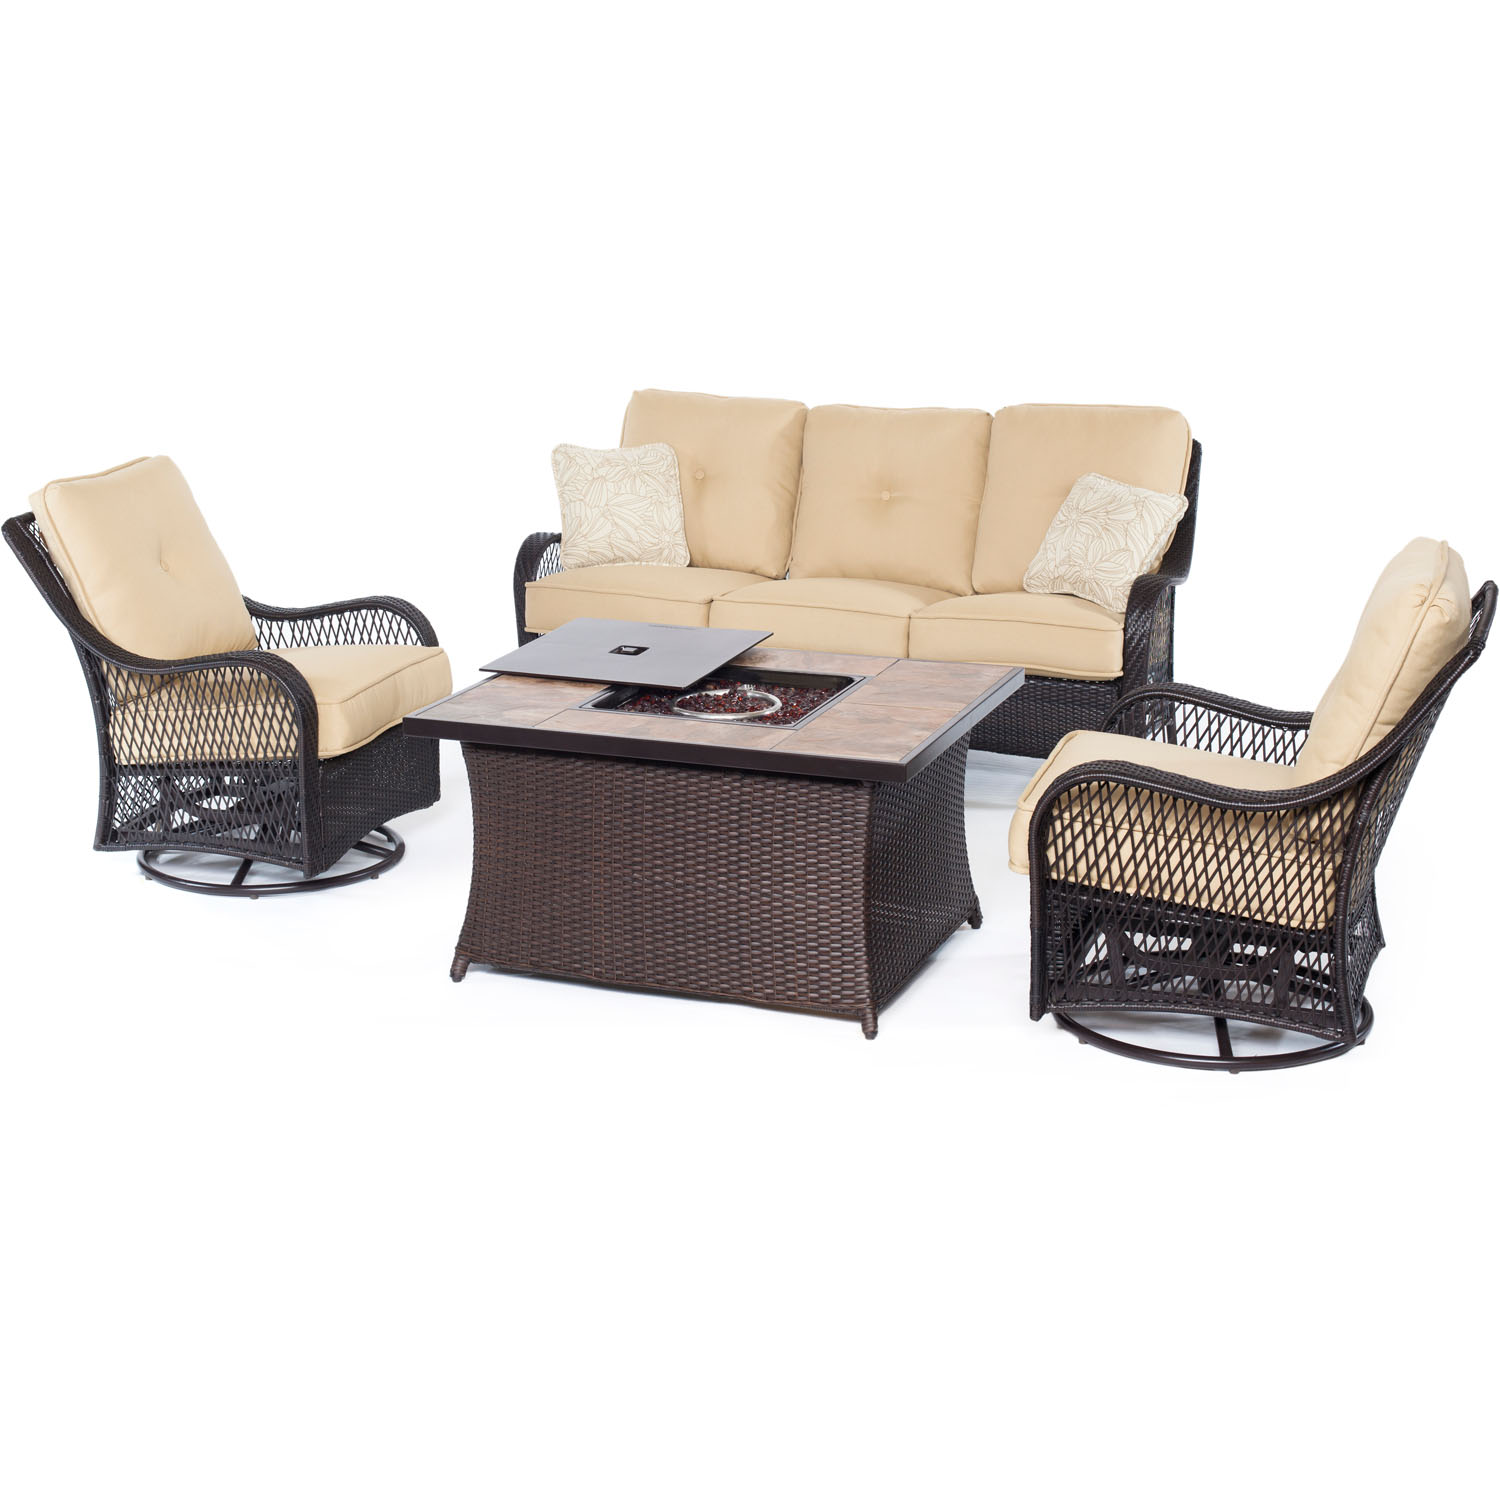 Hanover Orleans 4-Piece Woven Fire Pit Lounge Patio Set with Faux-Stone Tile Top